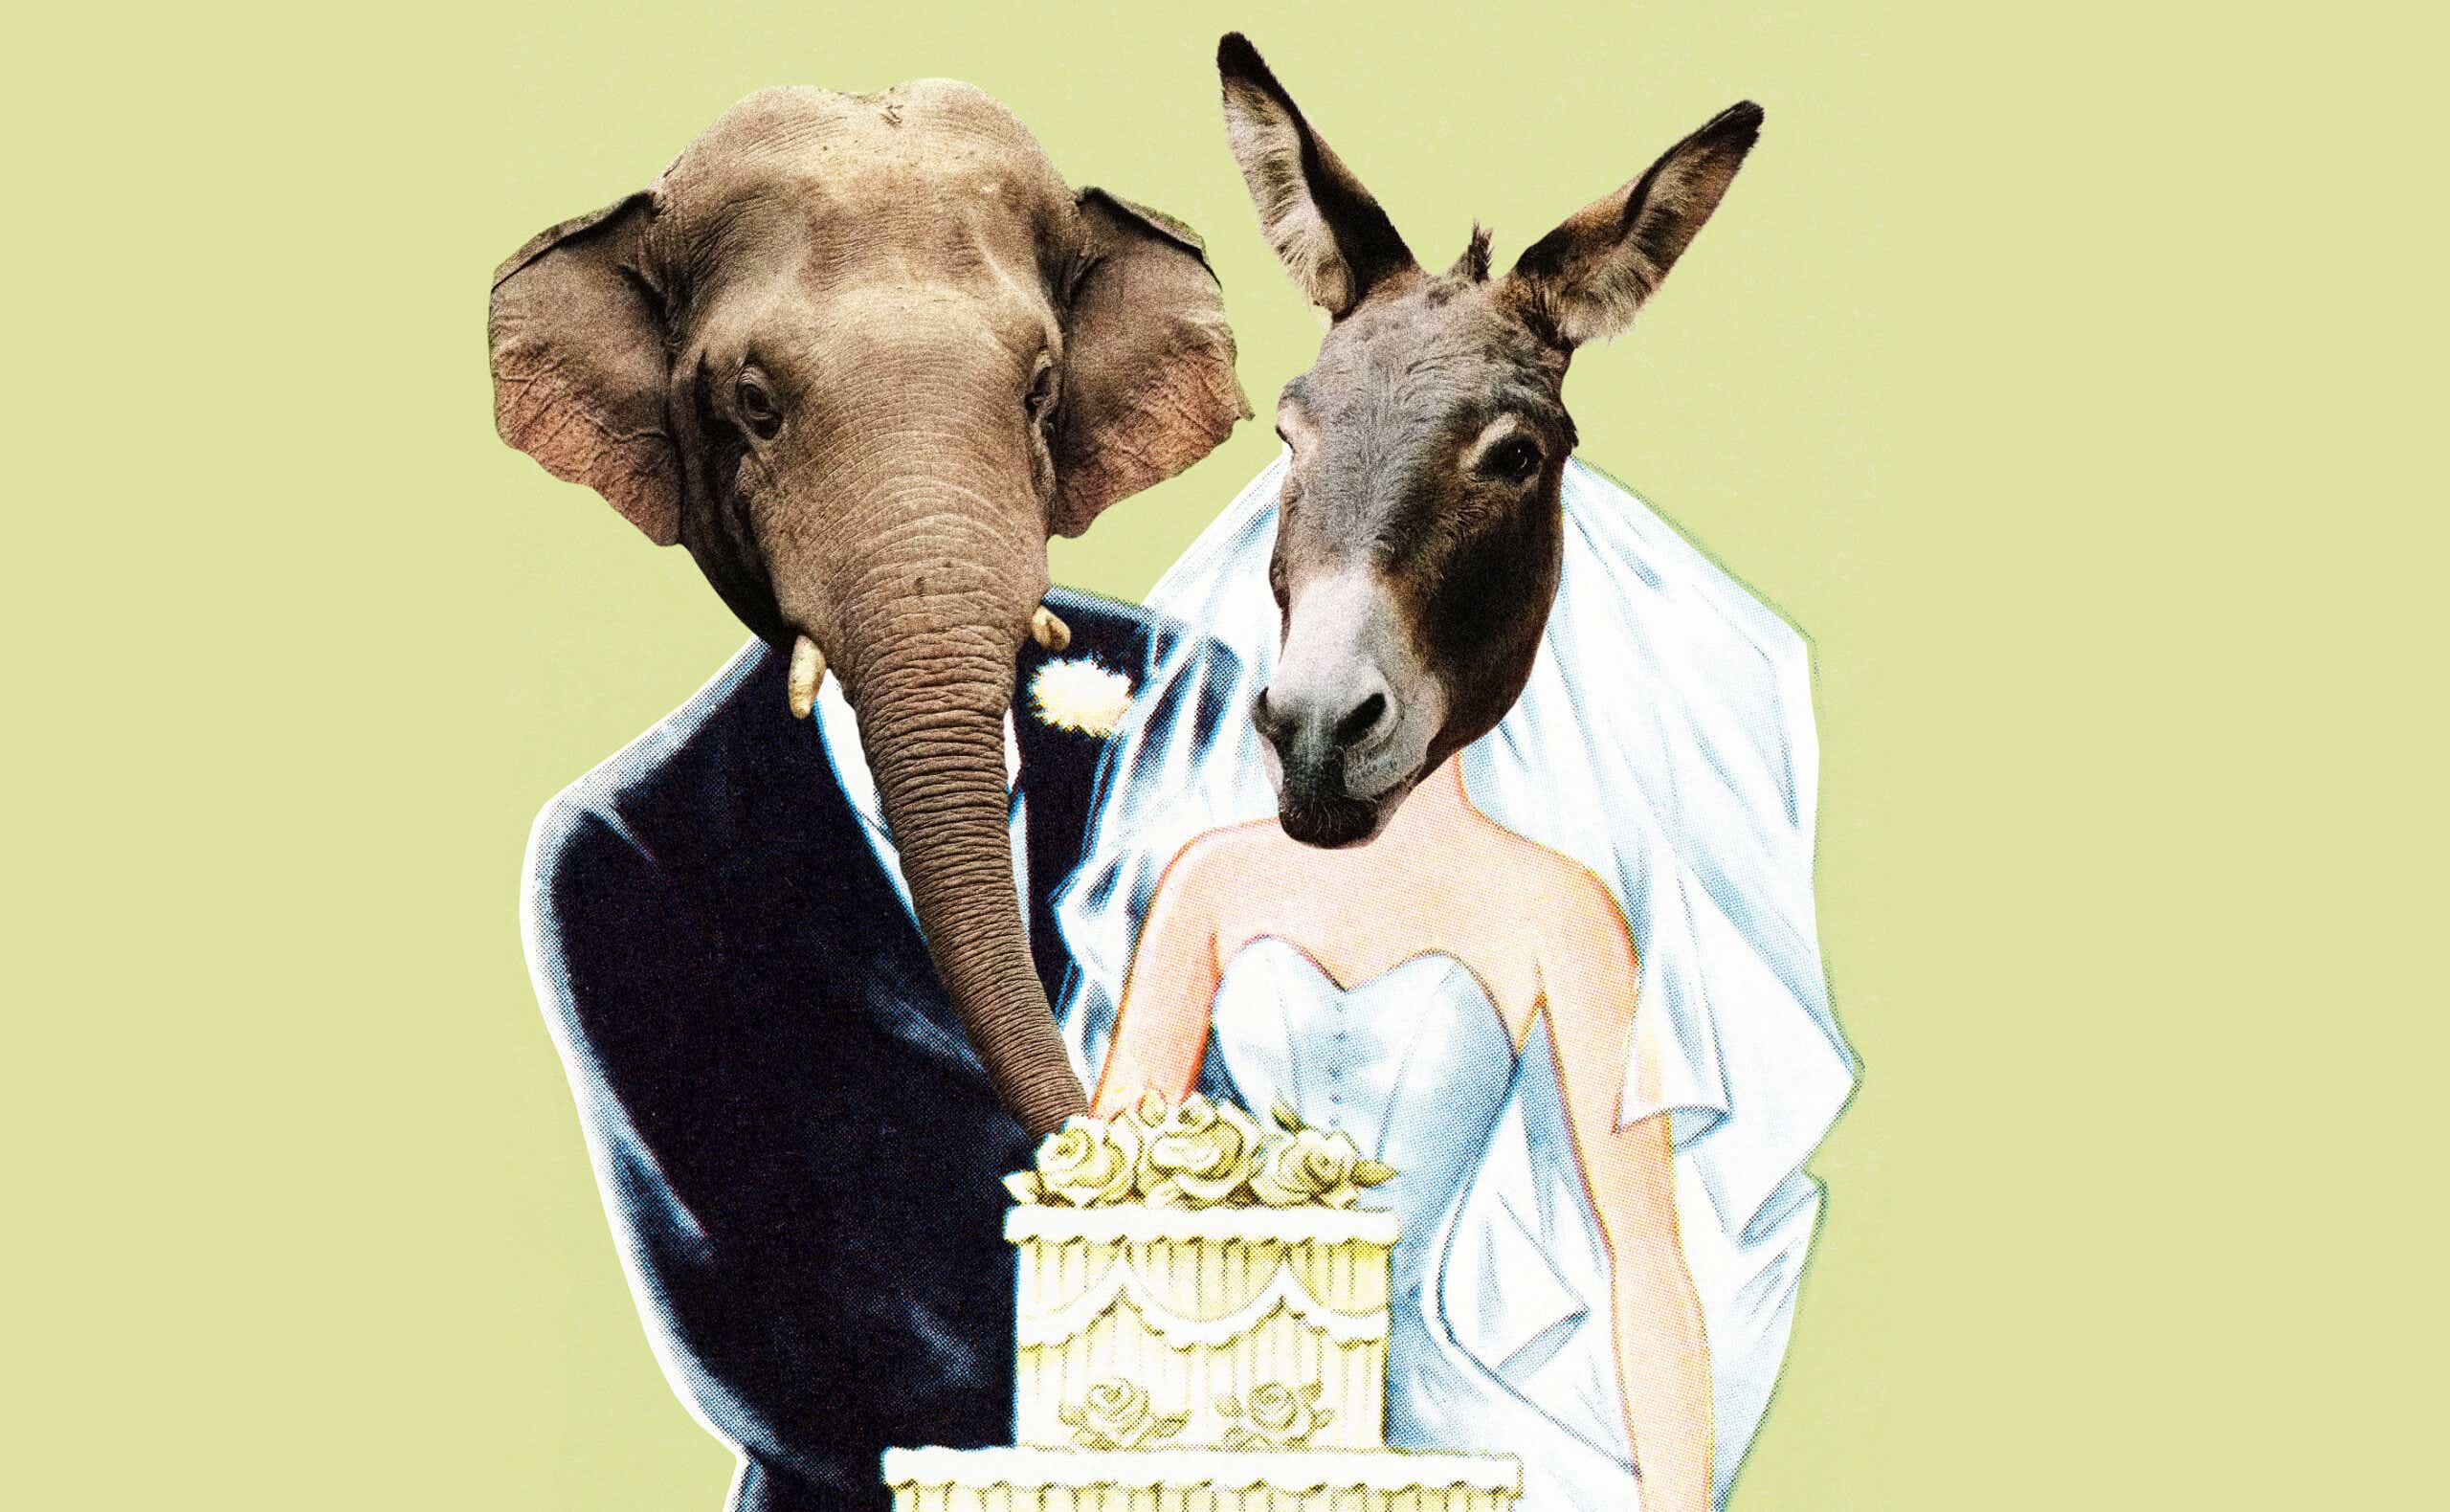 Illustration of a married couple. The groom has an elephant head and the bride has a donkey head, representing different political parties